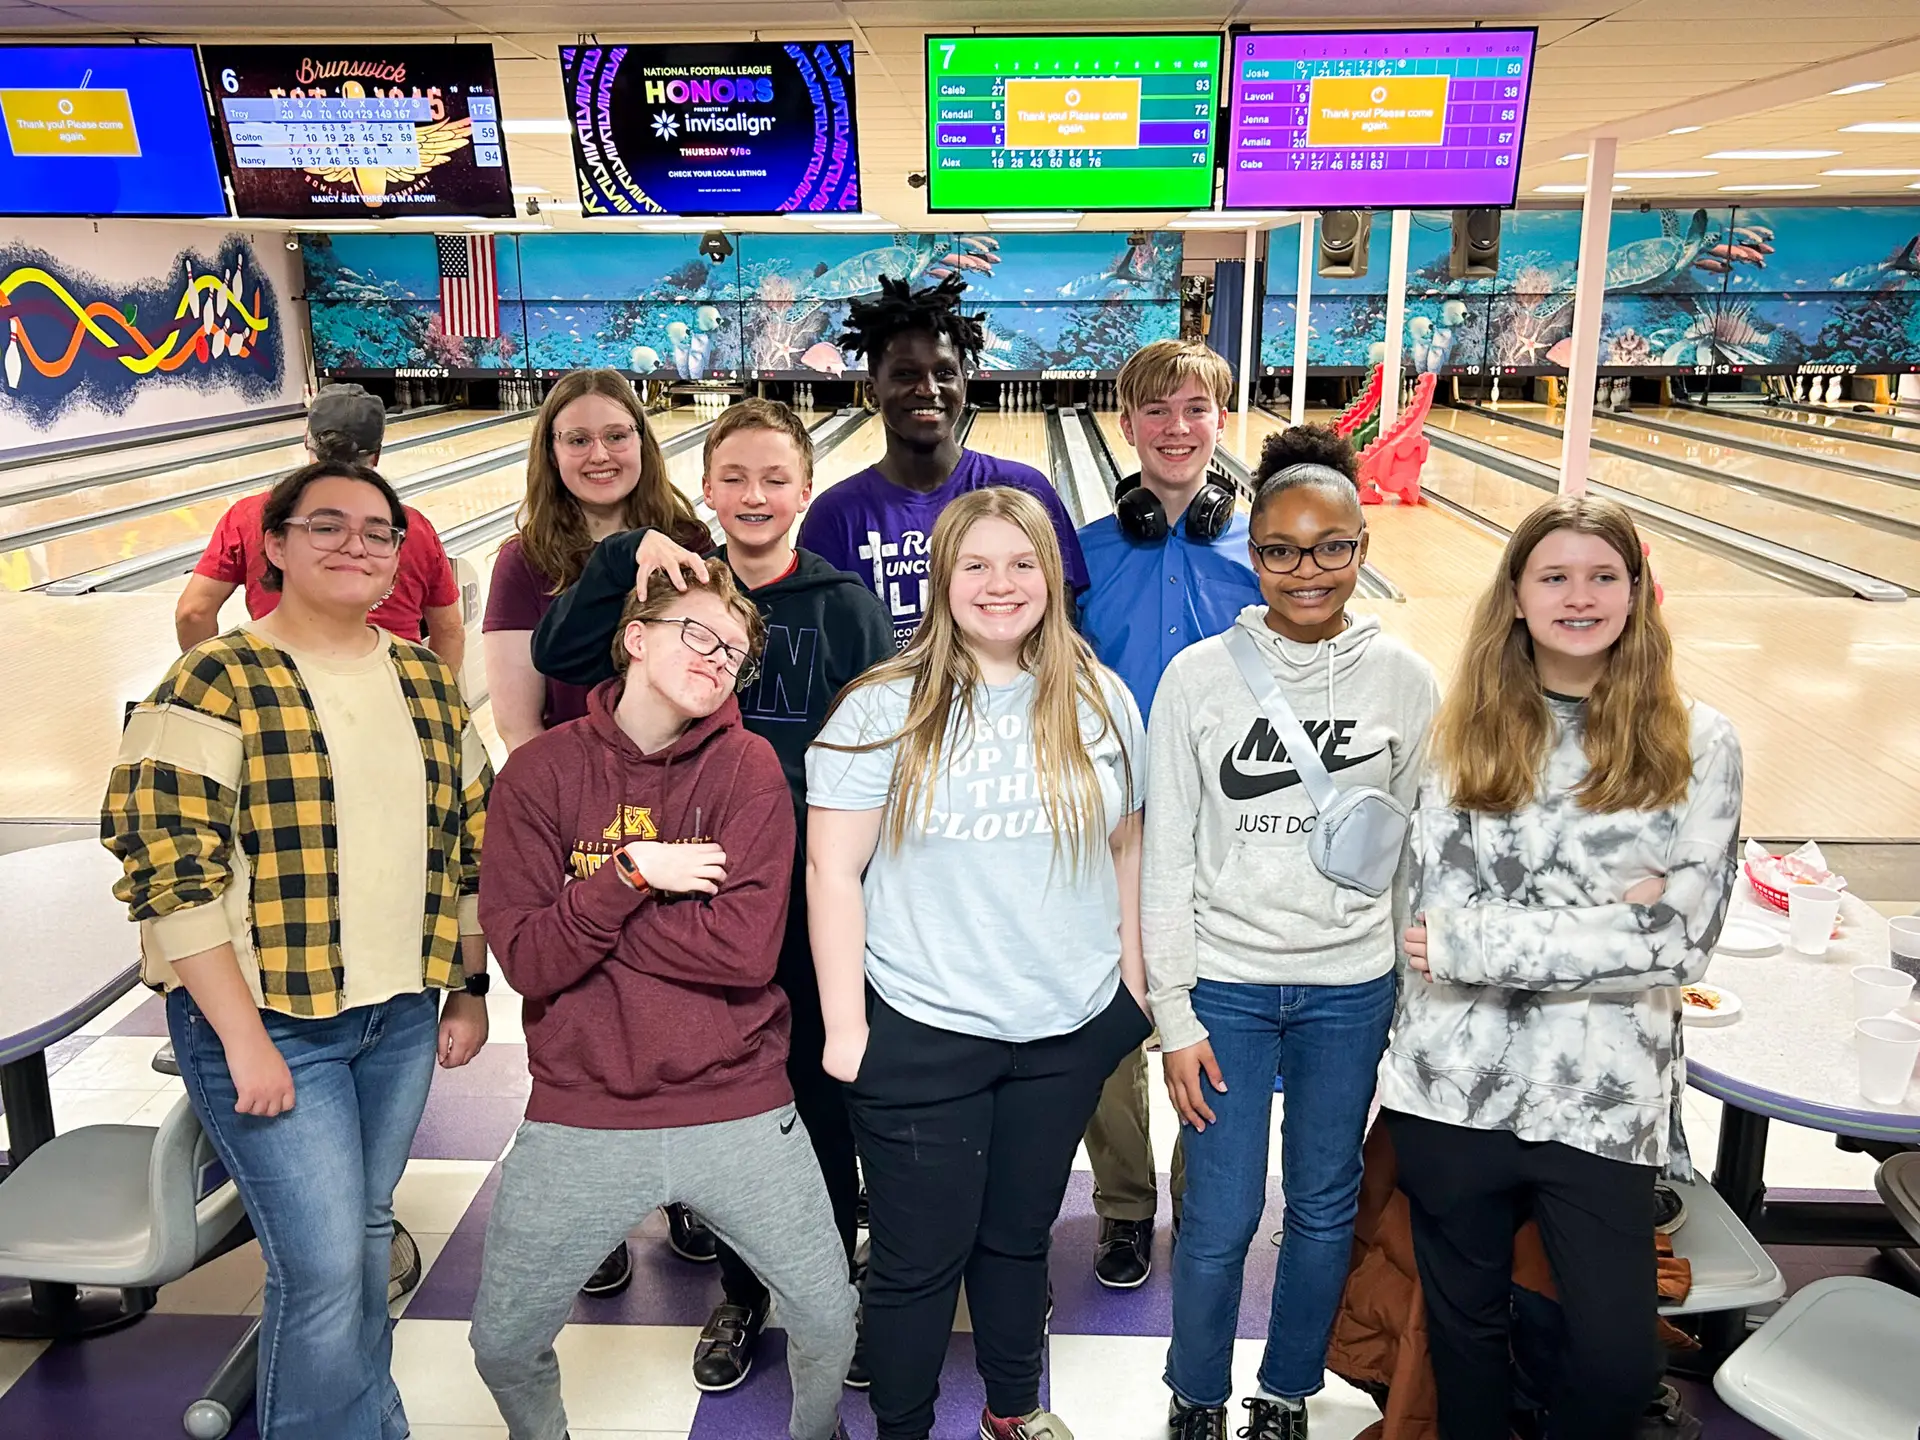 Spyrit youth group goes bowling